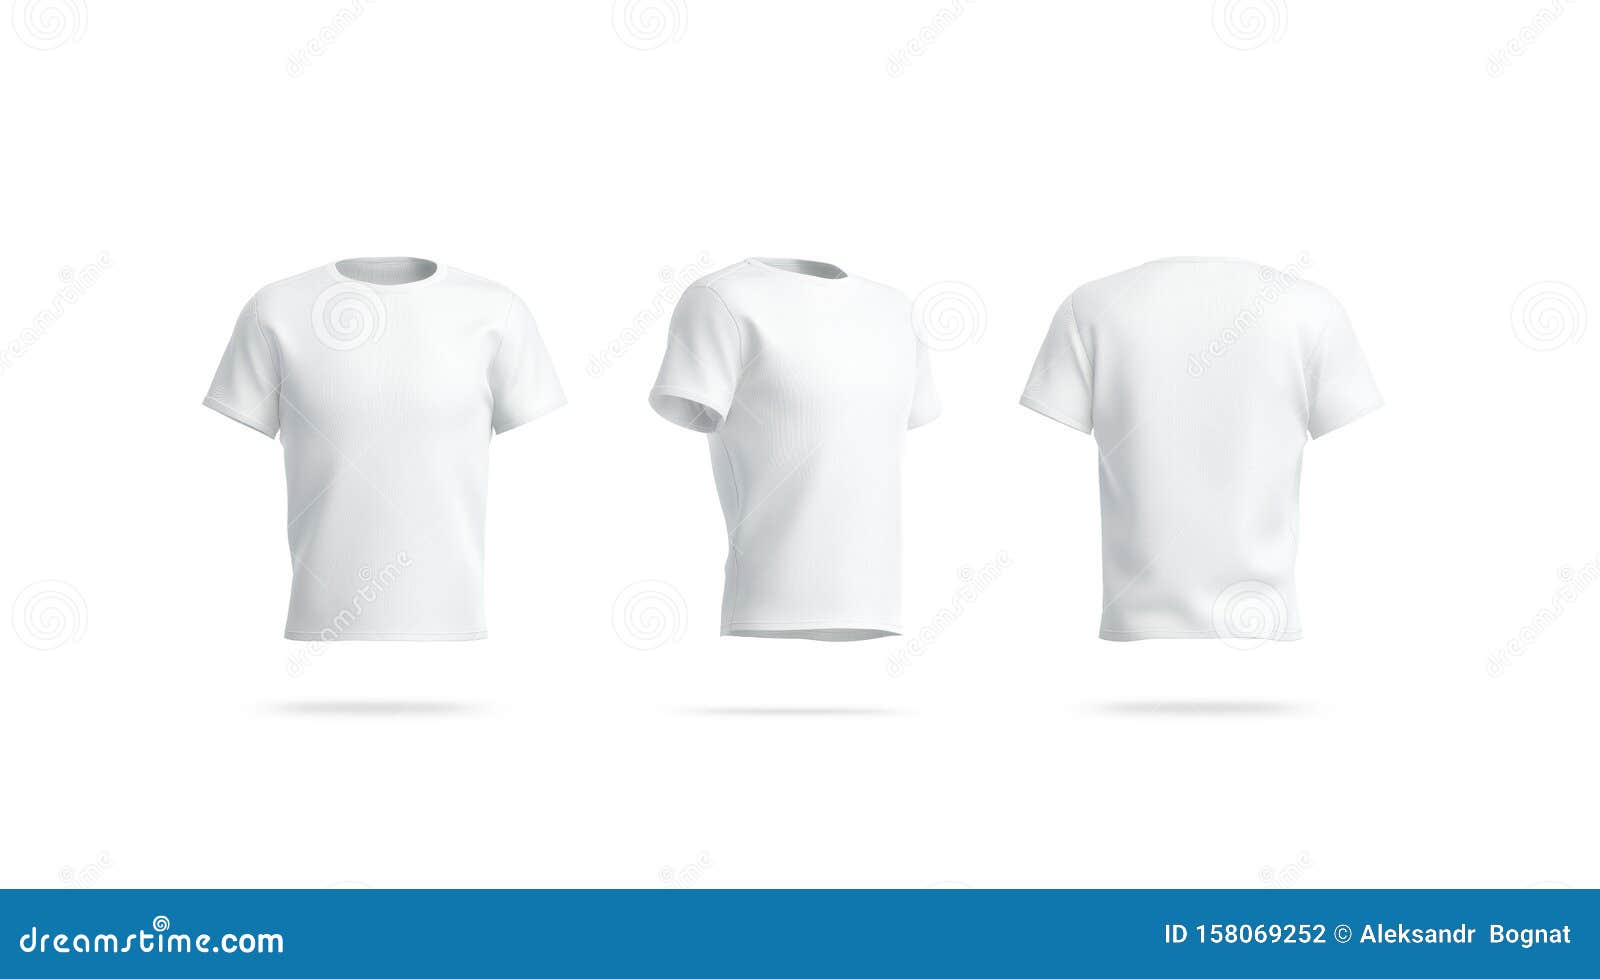 blank white clean tshirt mockup, front, side and back view